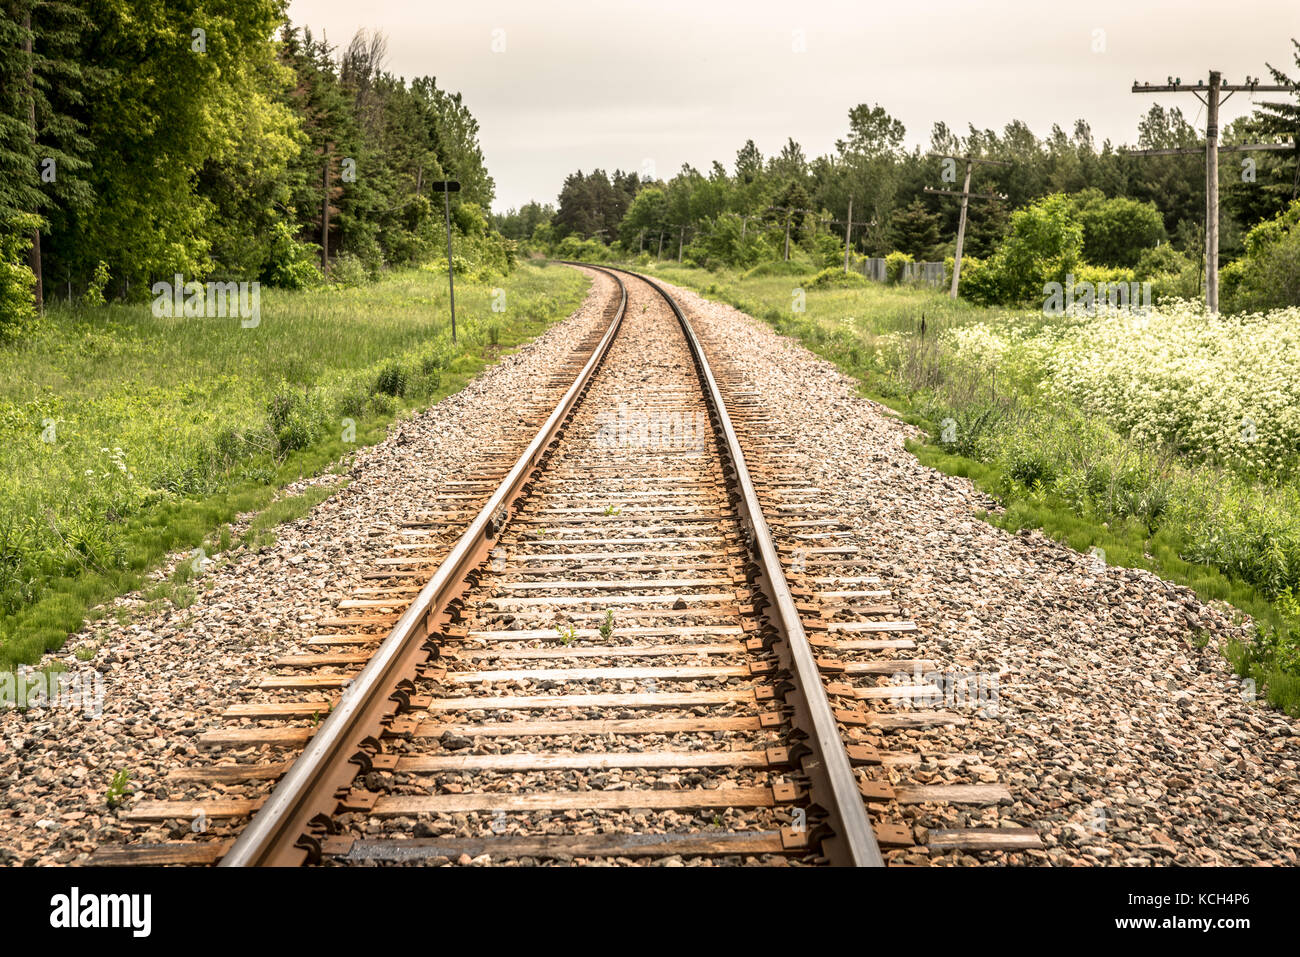 Railway tracks going into the distance with dense woods on either side Stock Photo